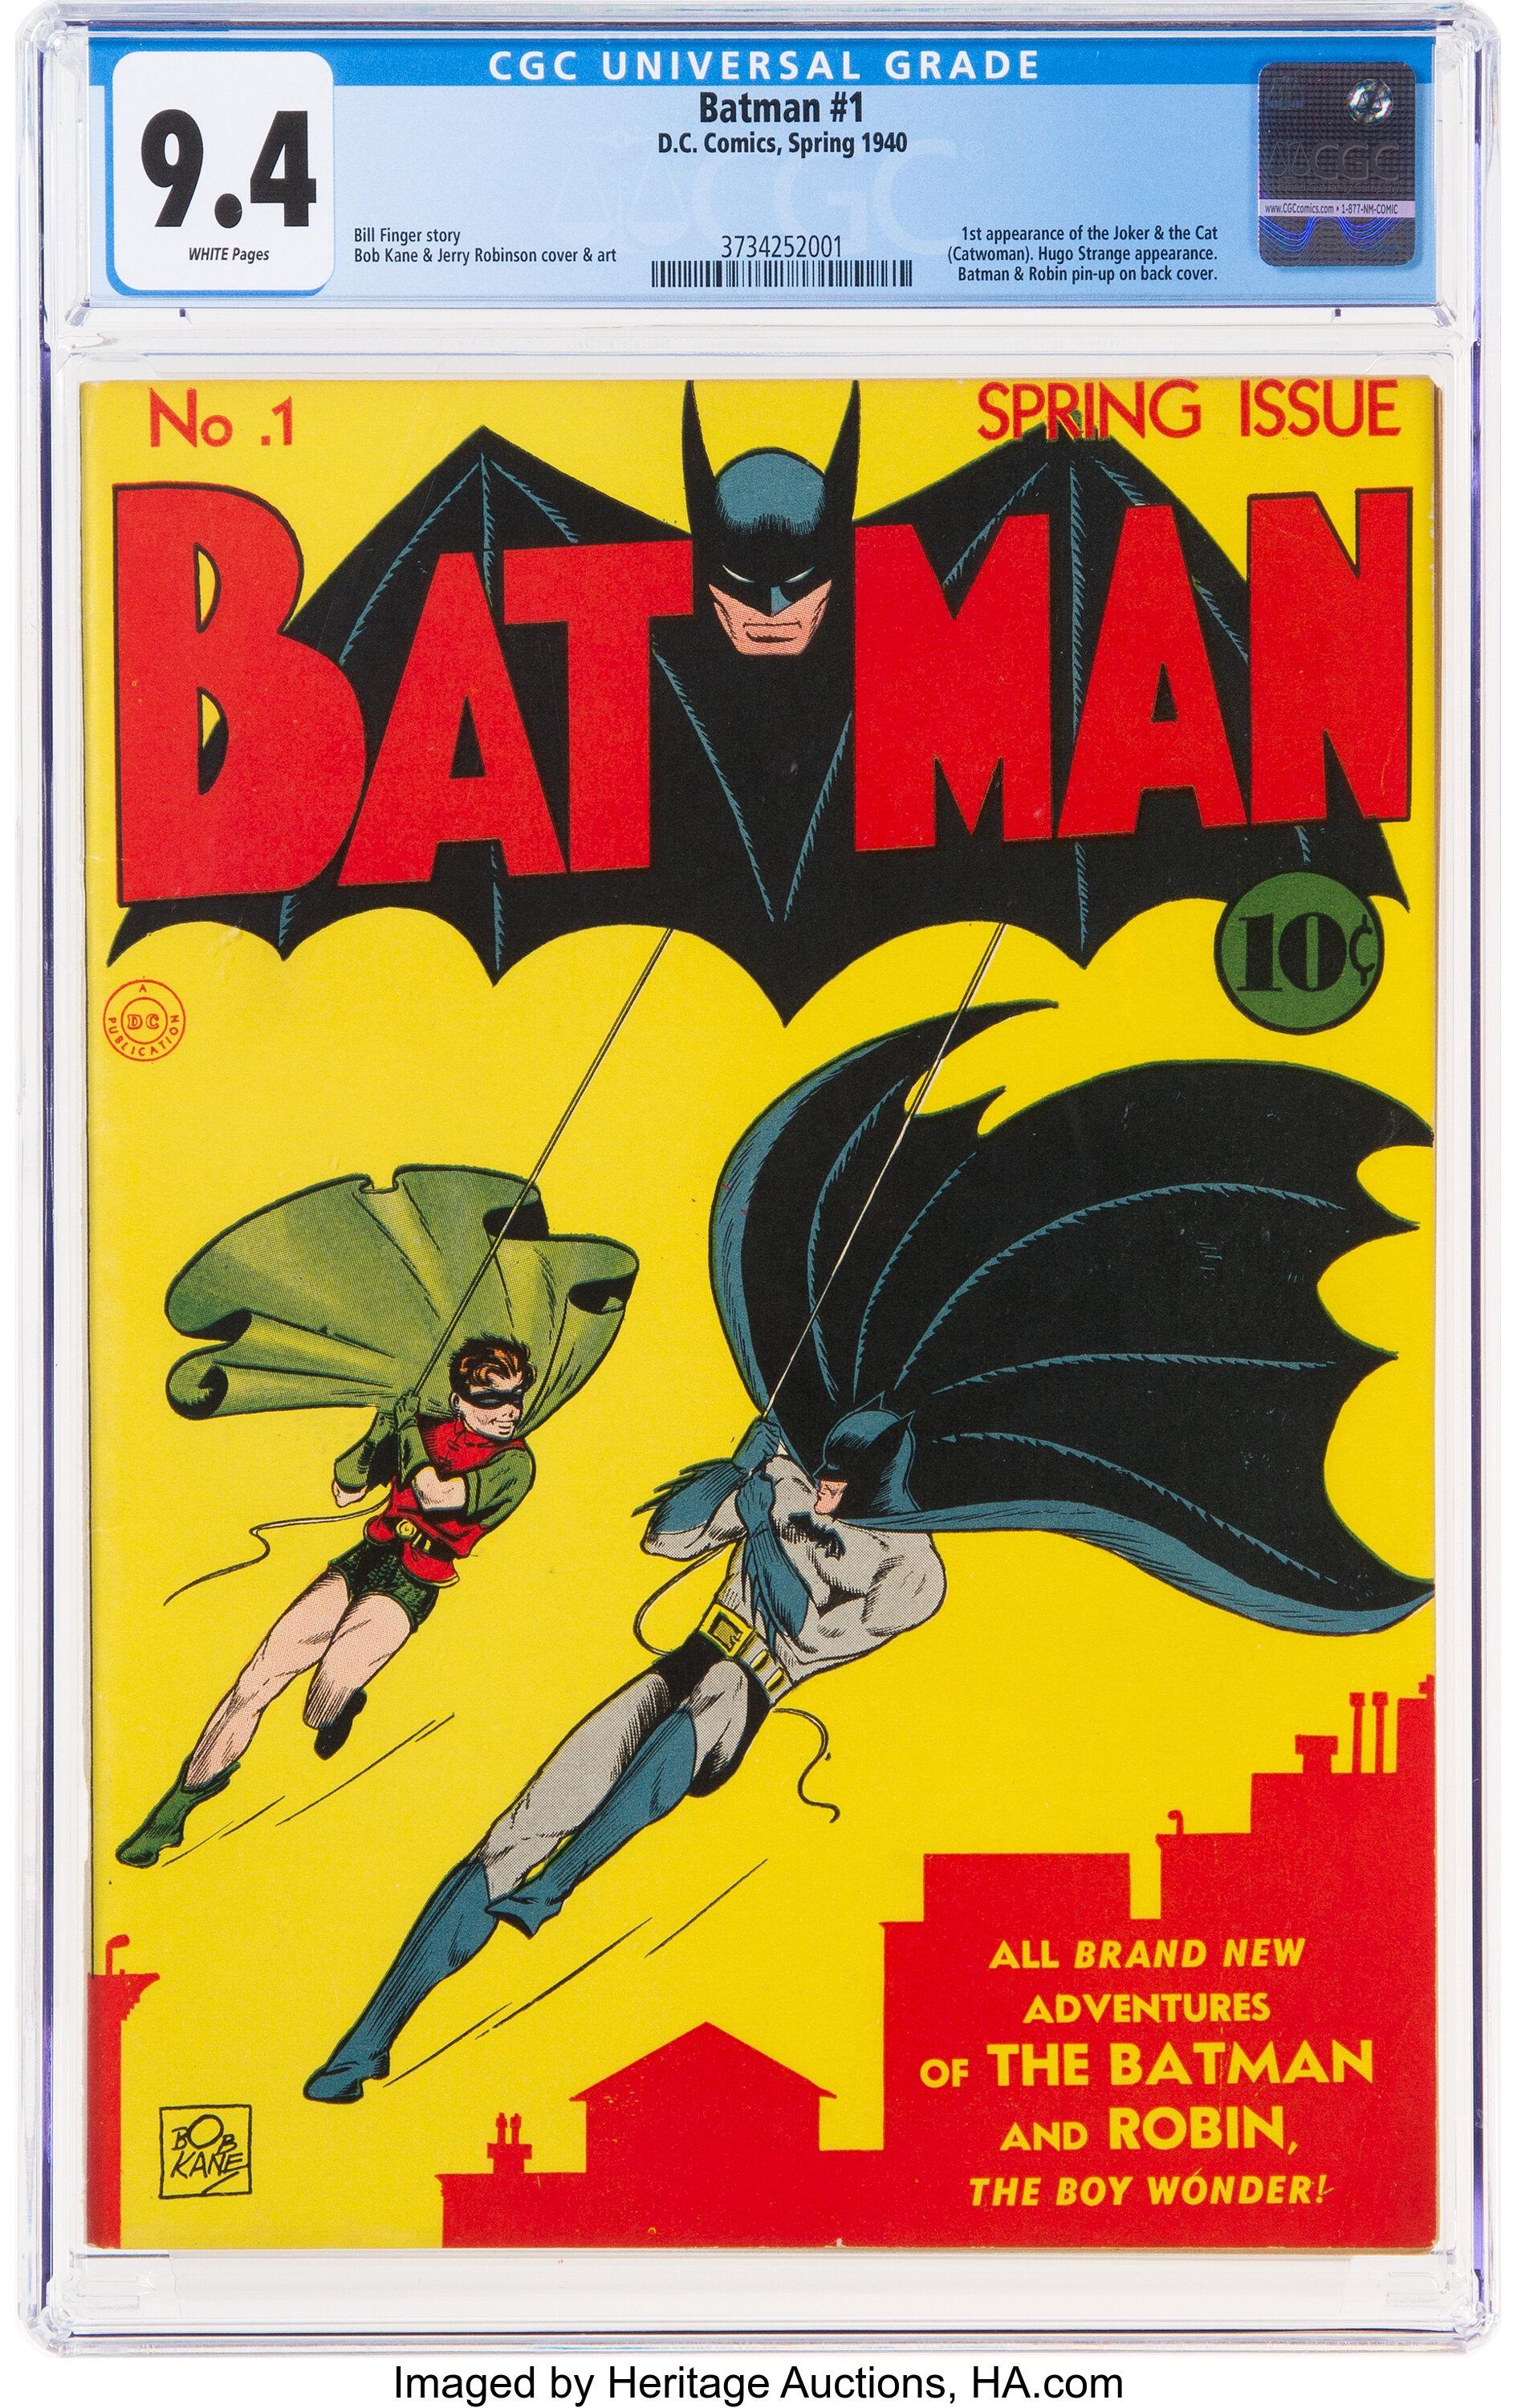 Why this Batman comic fetched $ million at auction